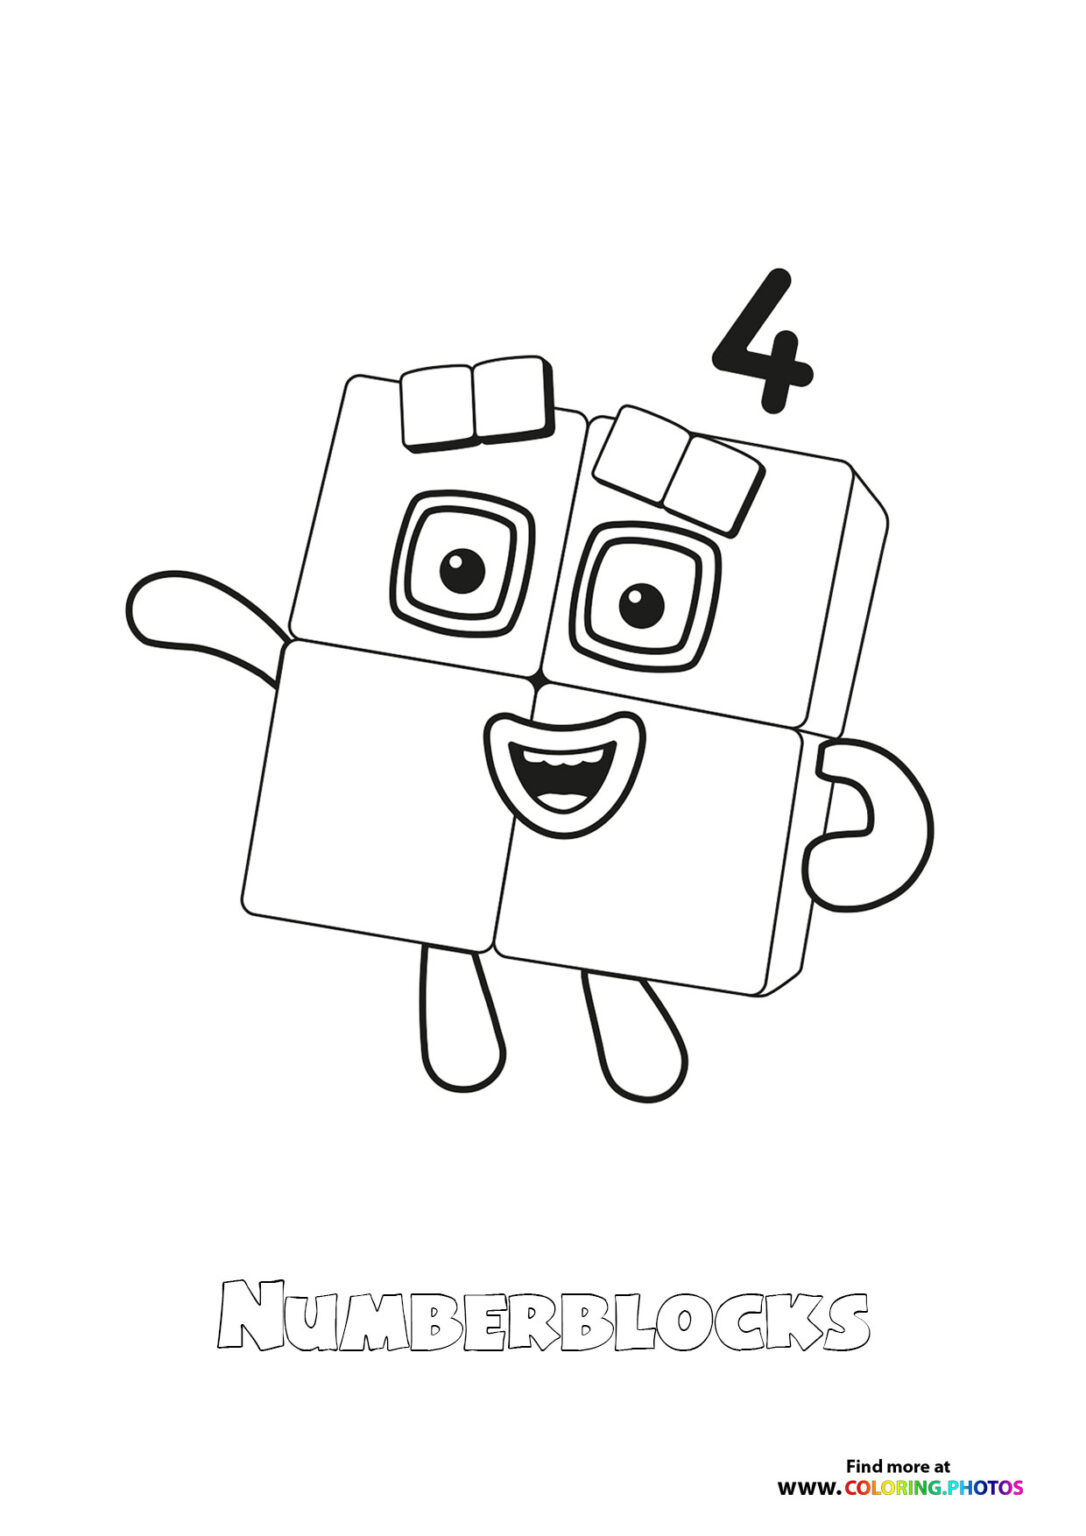 Number 4 Numberblocks - Coloring Pages for kids